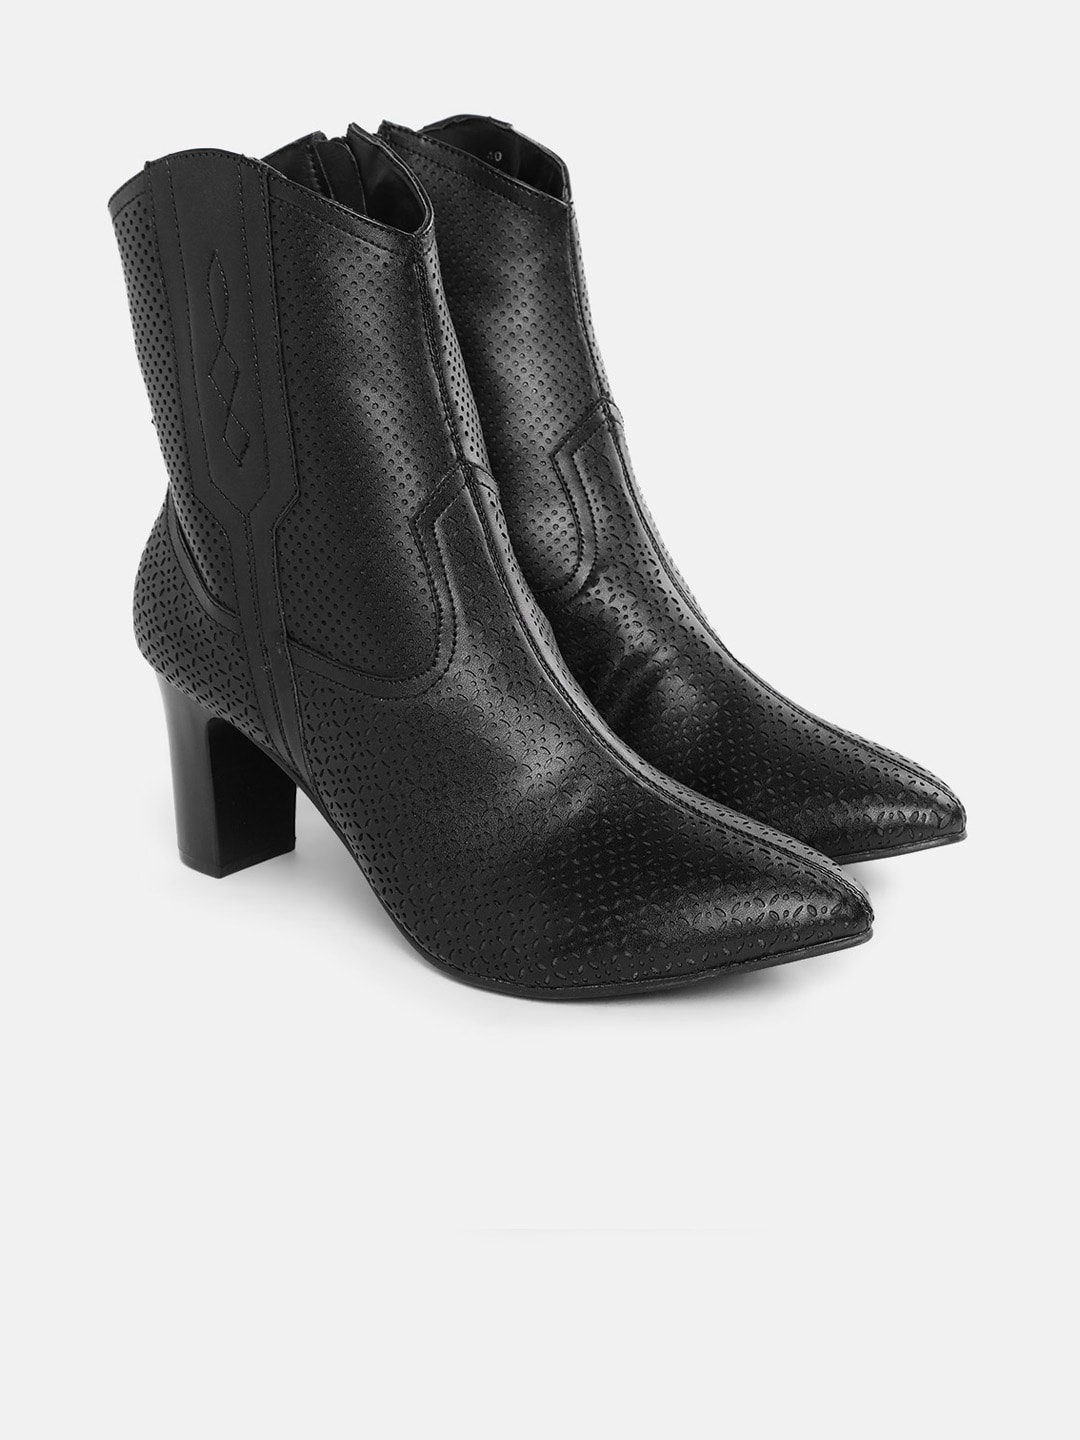 CORSICA Women Black Textured Block Heeled Boots with Laser Cuts Price in India